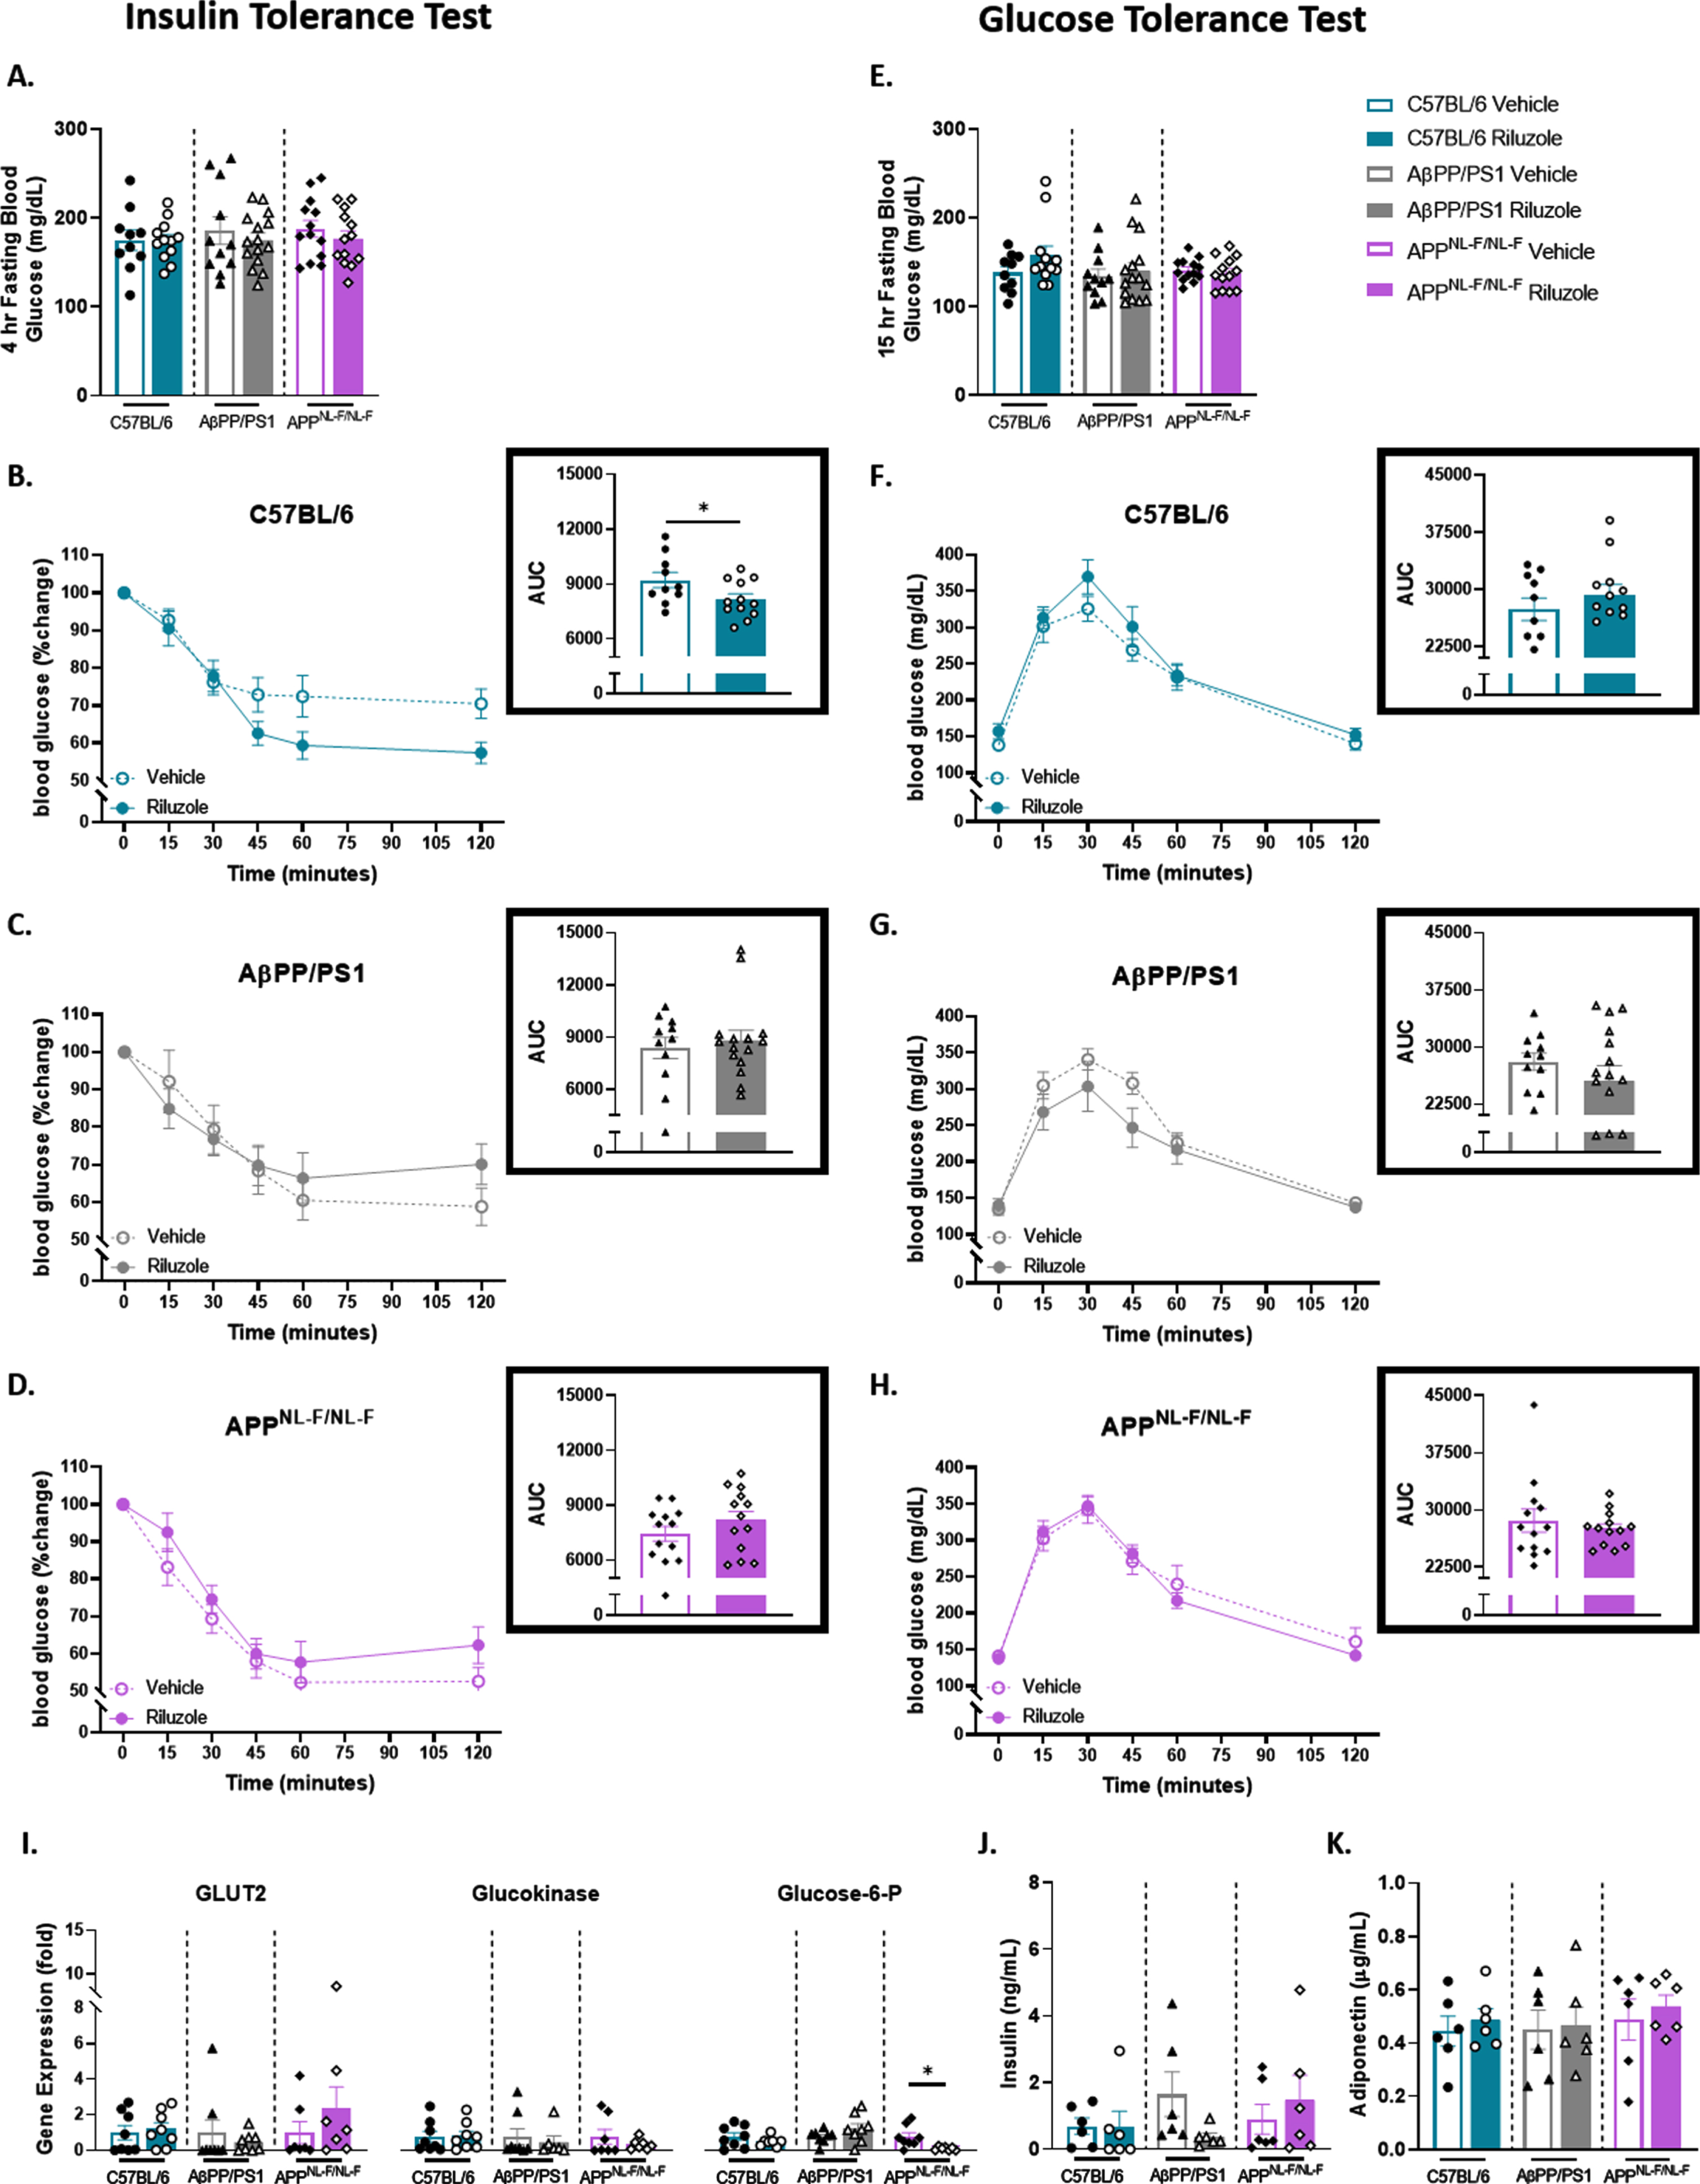 Female AD mice fail to show improved glucose tolerance with riluzole treatment similar to littermate C57BL/6 mice at 6 months of age. A) Blood glucose levels acquired from the tail vein after a 4-h fast. B-D) Insulin tolerance was measured by percent change from baseline (T = 0). Insets show AUC for each genotype and treatment group. E) Blood glucose levels obtained from the tail vein after a 15-h fast. F-H) Two-hour monitoring of blood glucose levels following an IP injection of glucose. Insets displays AUC. I) RT-PCR analysis of liver tissue. J-K) ELISA quantification of serum insulin and adiponectin levels. ITT/GTT time course, within-genotype repeated measures two-way ANOVA, Fisher’s LSD; AUC (n = 10–15), RT-PCR (n = 6–8), and ELISA analysis (n = 5–6), within-genotype unpaired t-test, *p < 0.05, **p < 0.01.